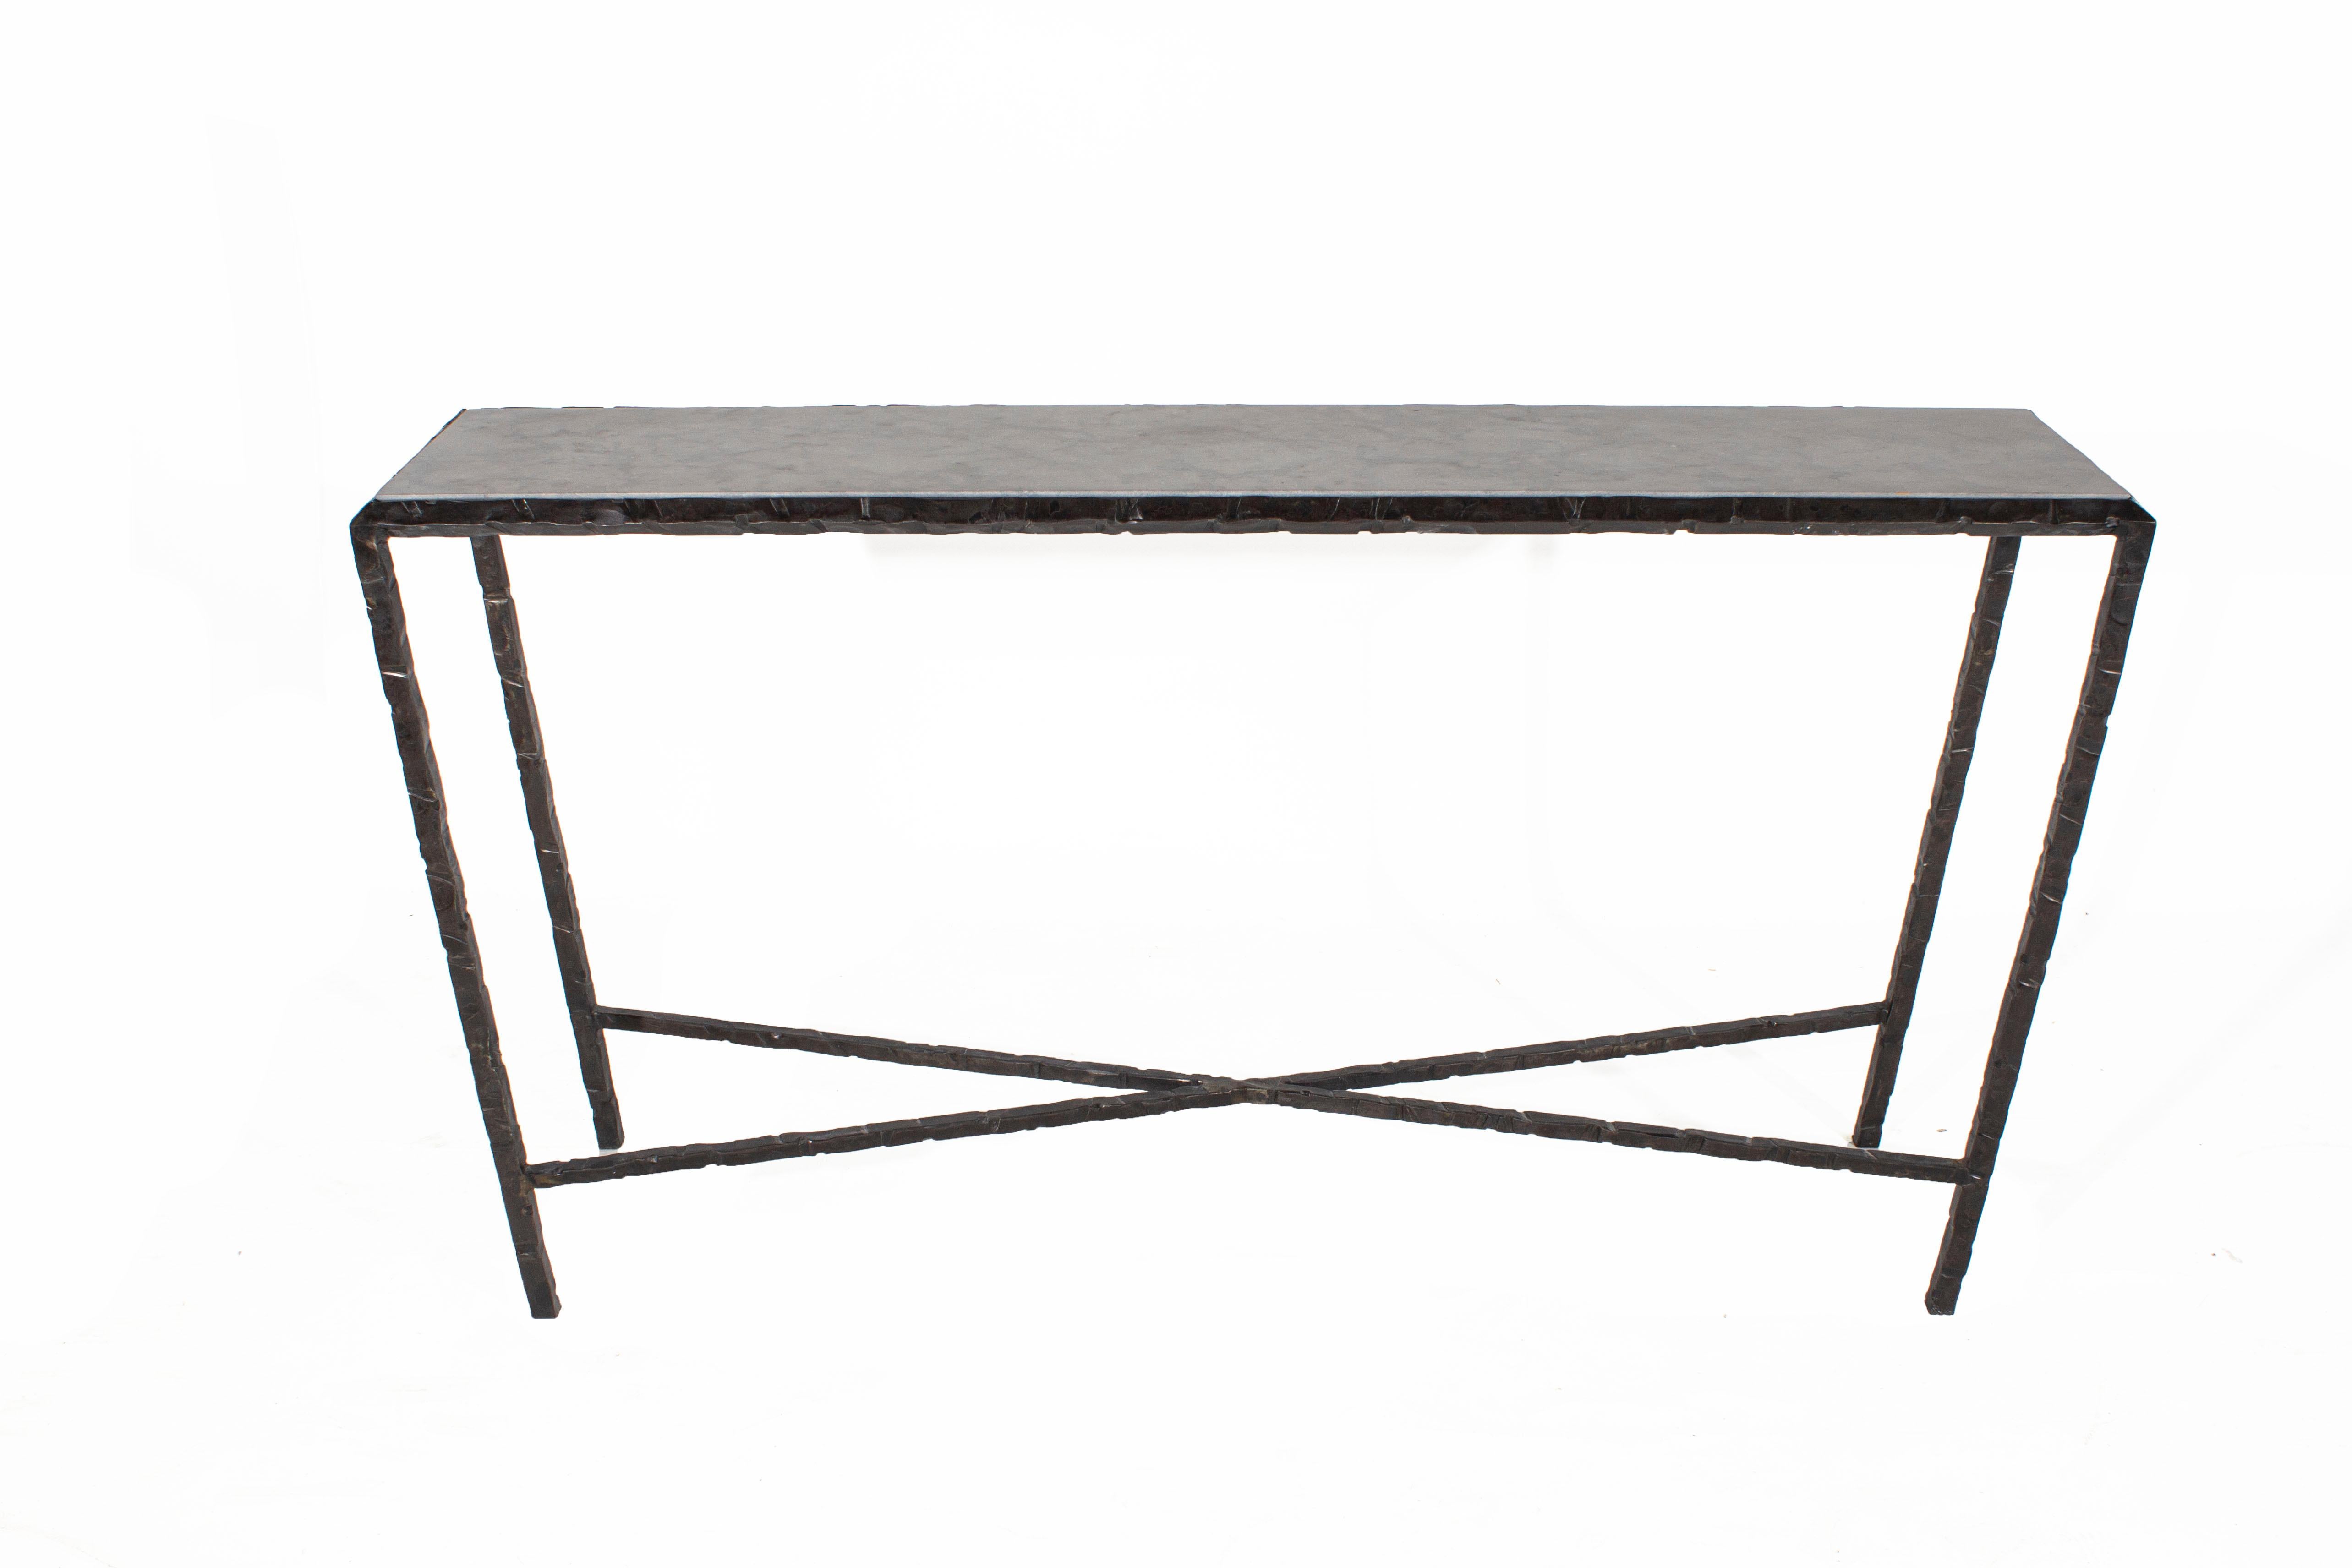 This item is custom from Vision & Design by Brendan Bass. 

Base and zinc top can be customized. Sancho Console.

Designed by Brendan Bass for the Vision and Design Collection, by using high quality materials and textures. All materials are sourced